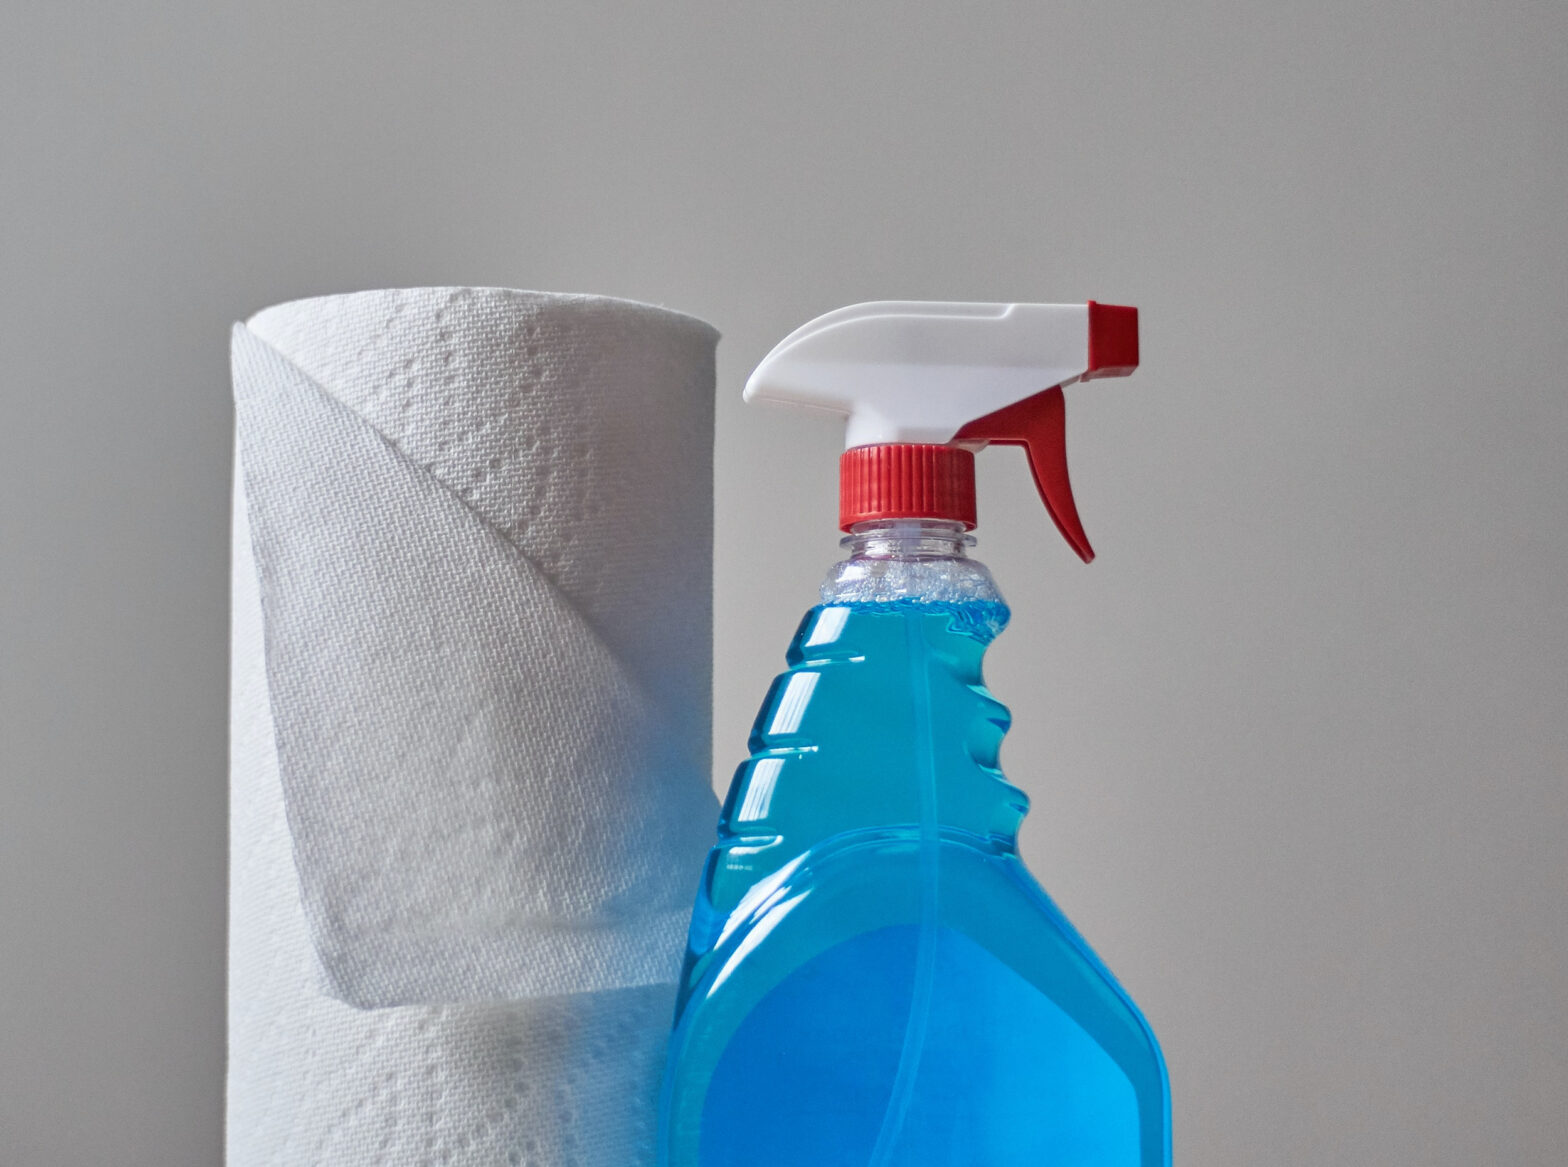 Blue cleaning product spray bottle with cleaning roll, photo by Crystal de Passillé-Chabot on Unsplash